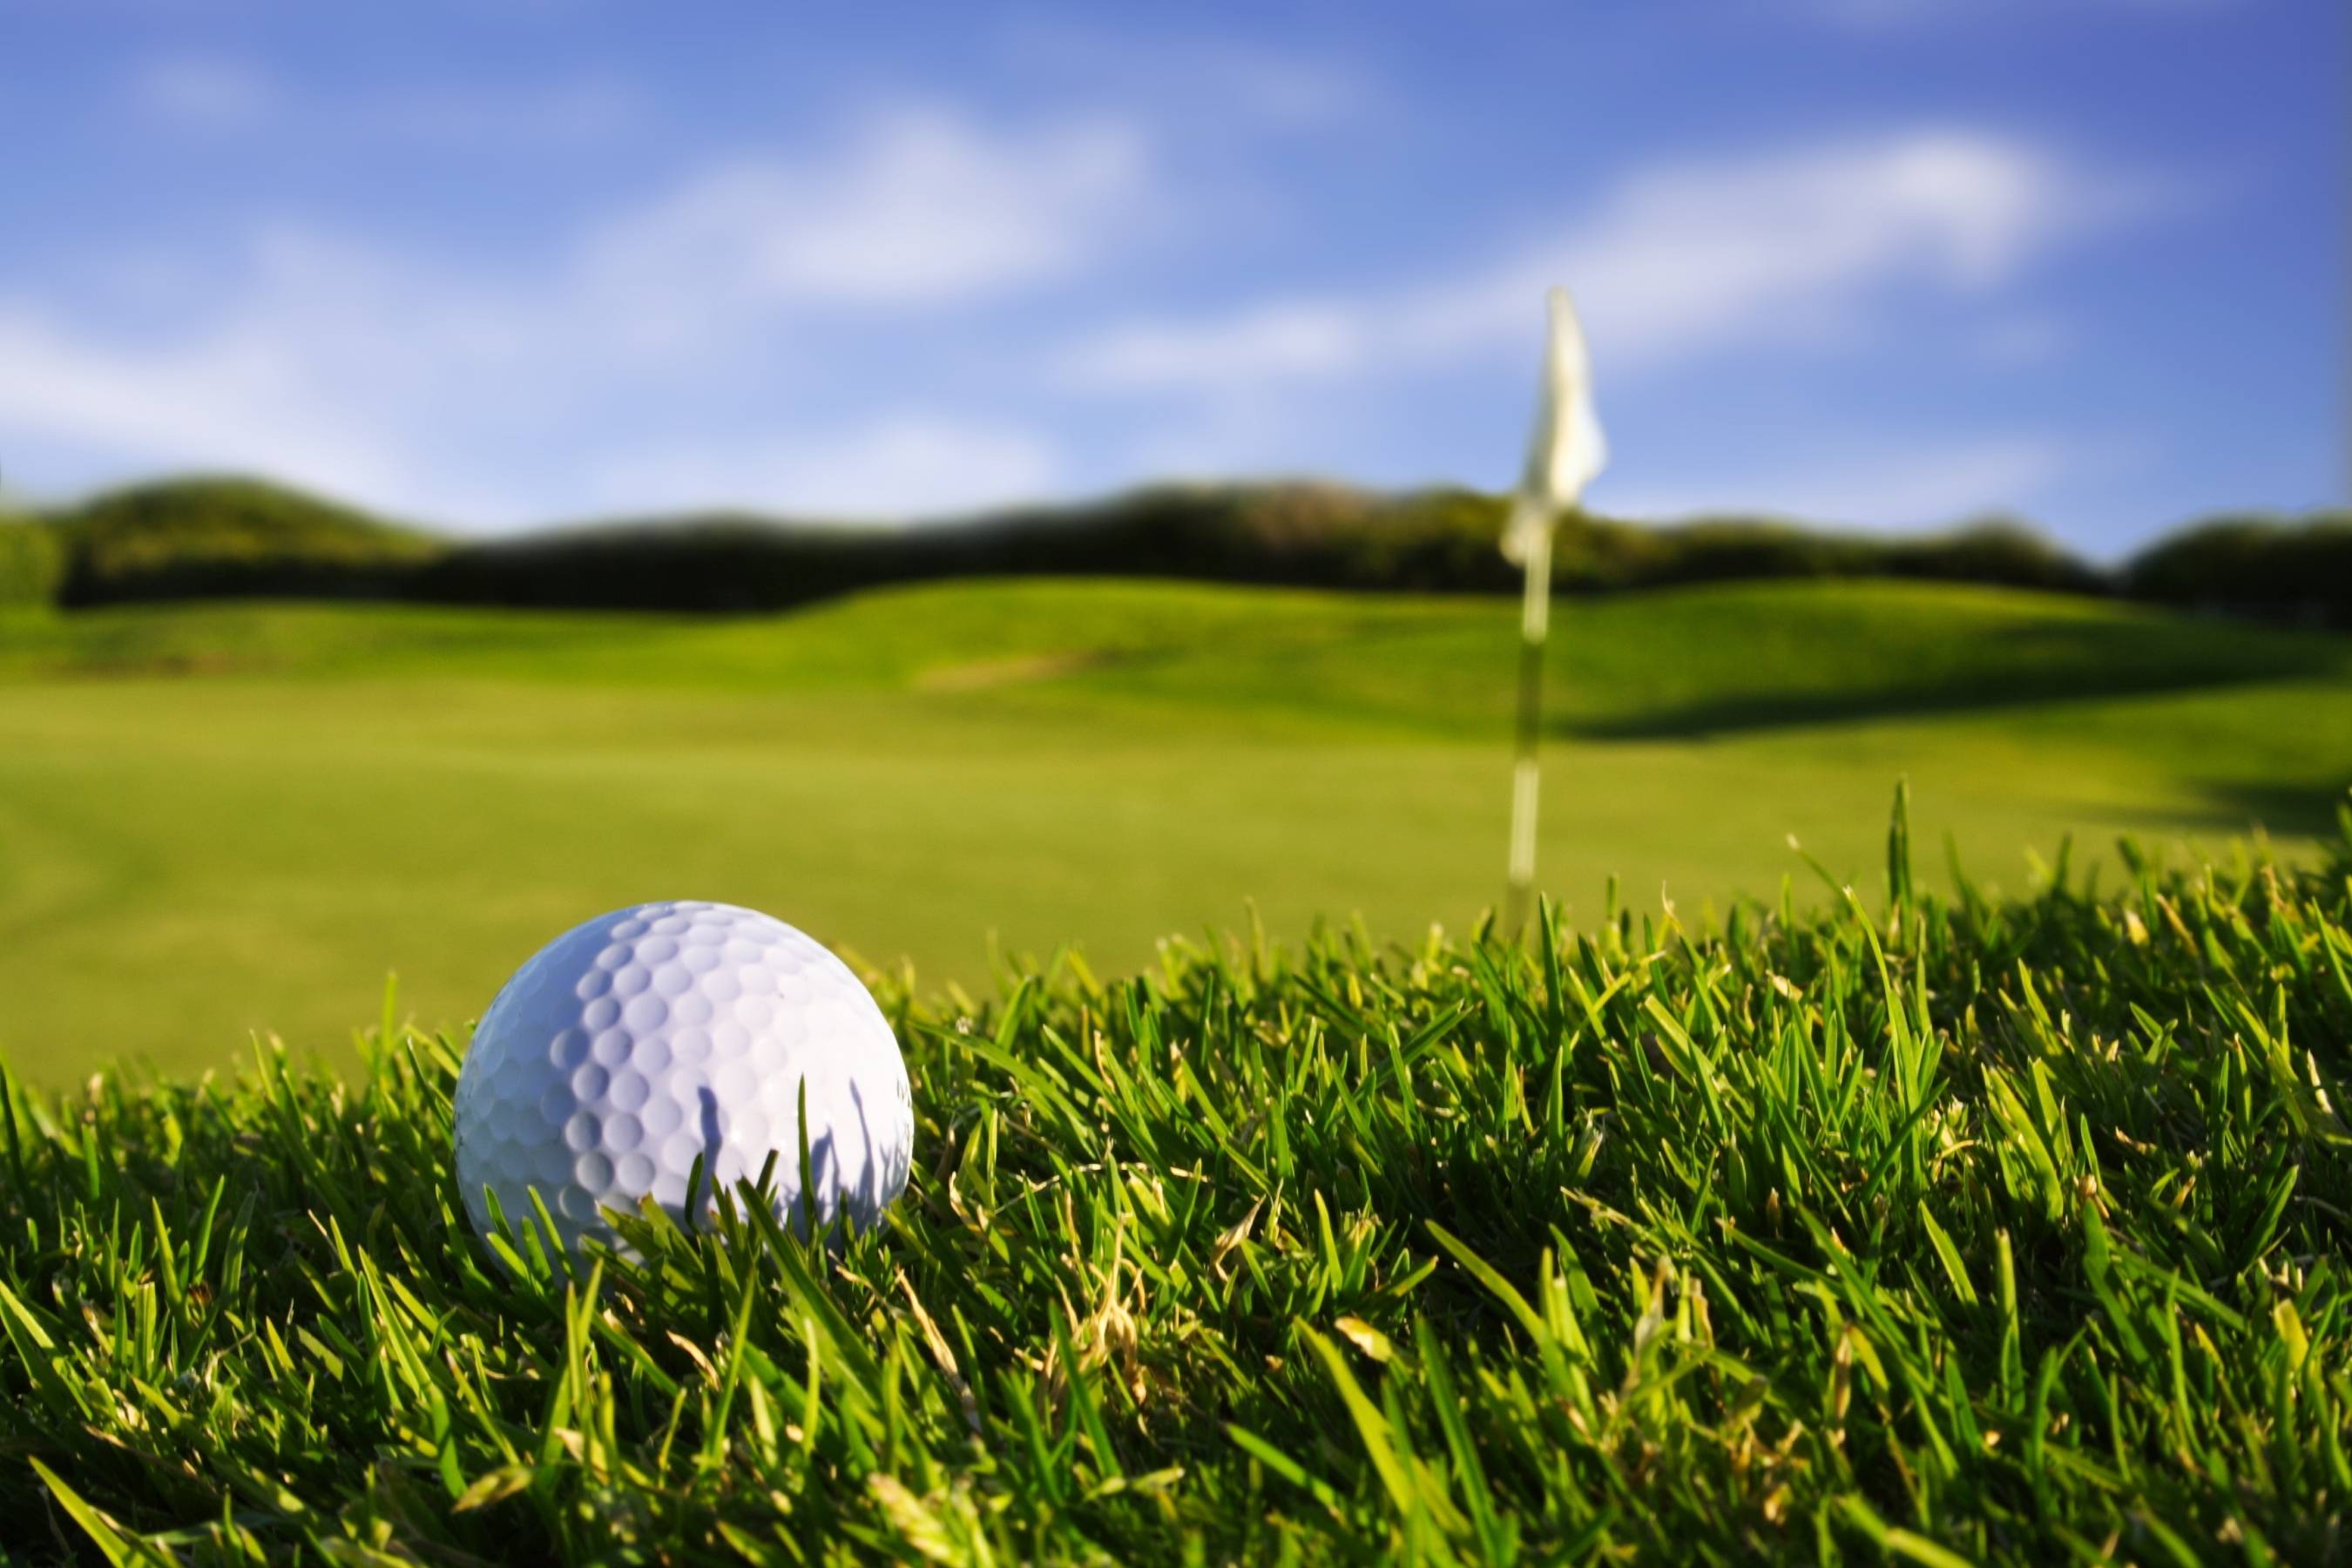 awesome golf image hd